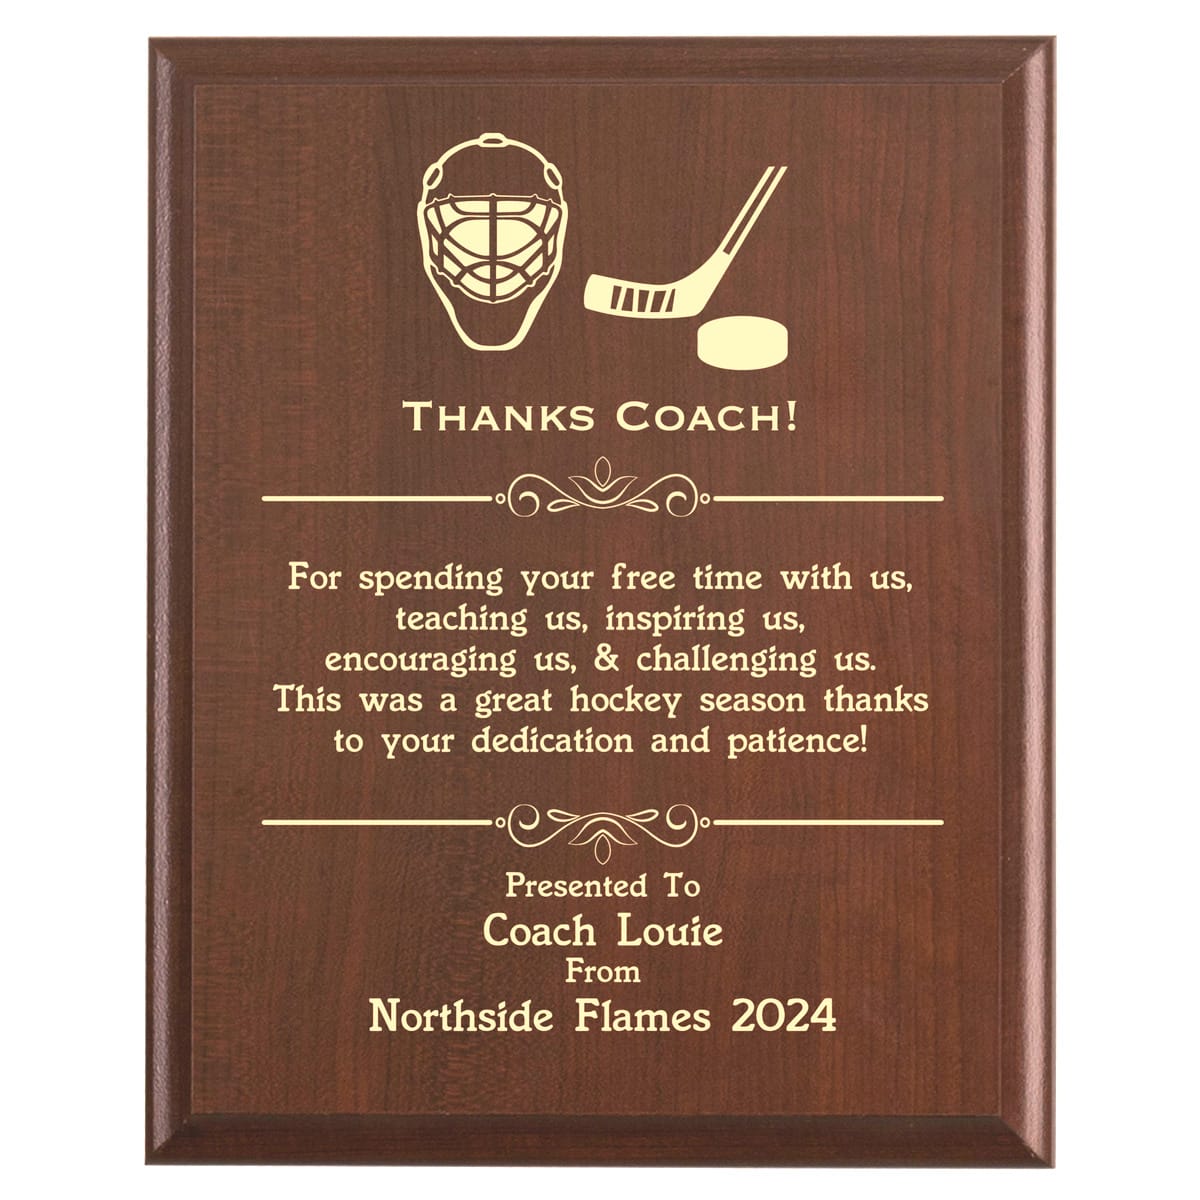 Plaque photo: Hockey Coach Thank You Gift design with free personalization. Wood style finish with customized text.